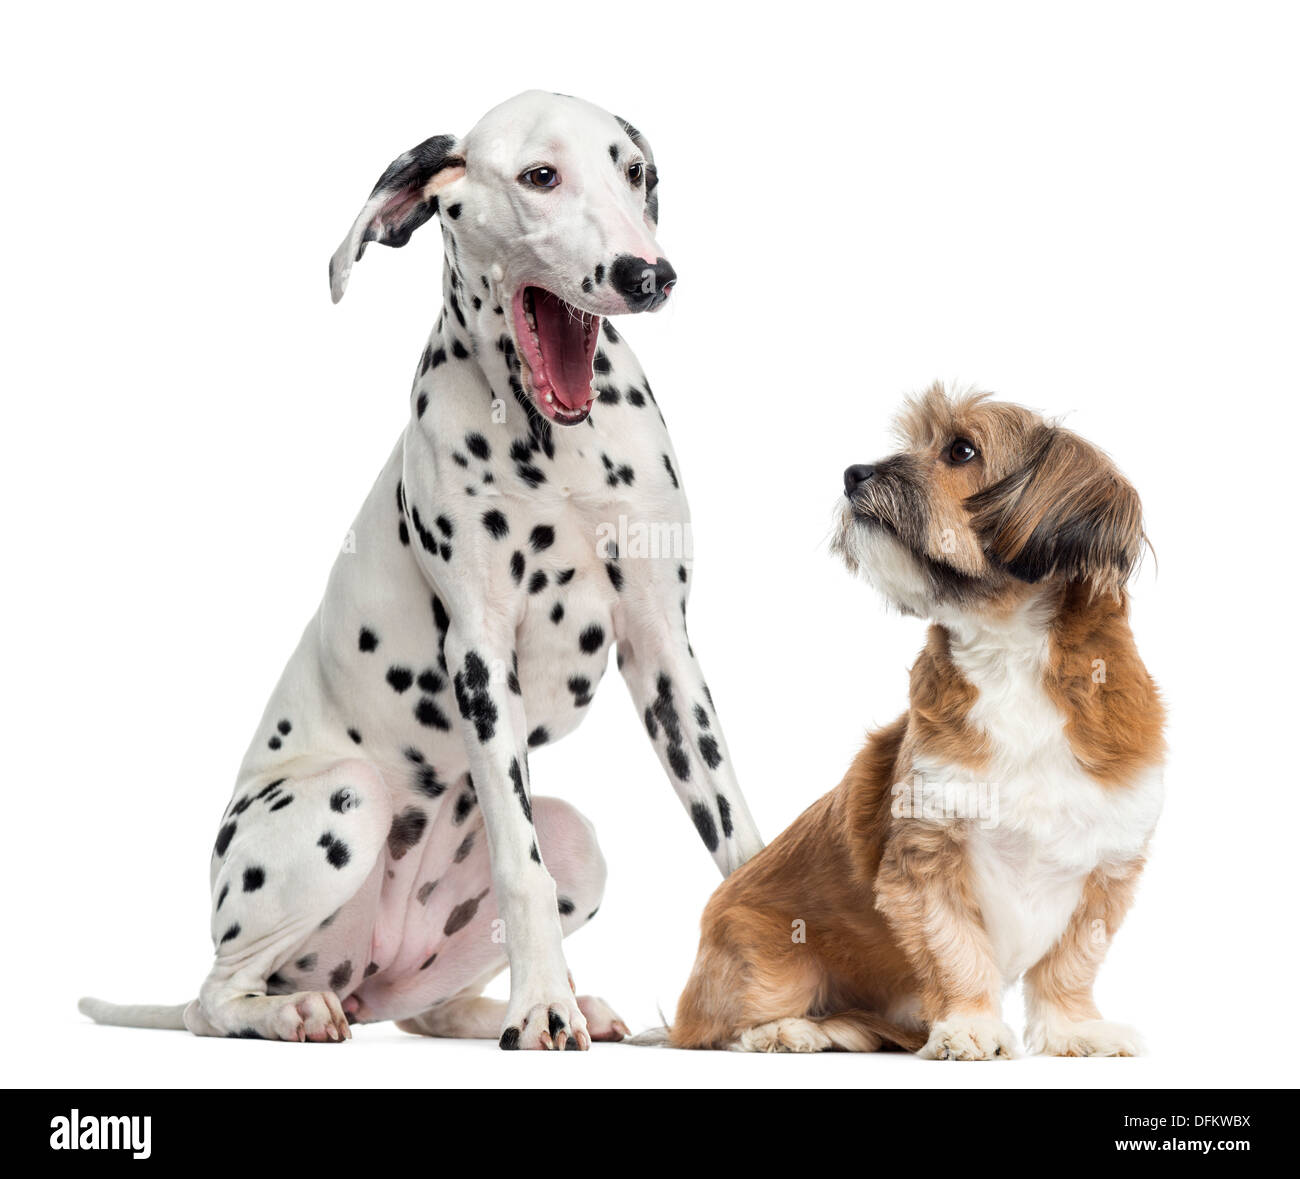 Dalmatian and Lhassa apso sitting against white background Stock Photo